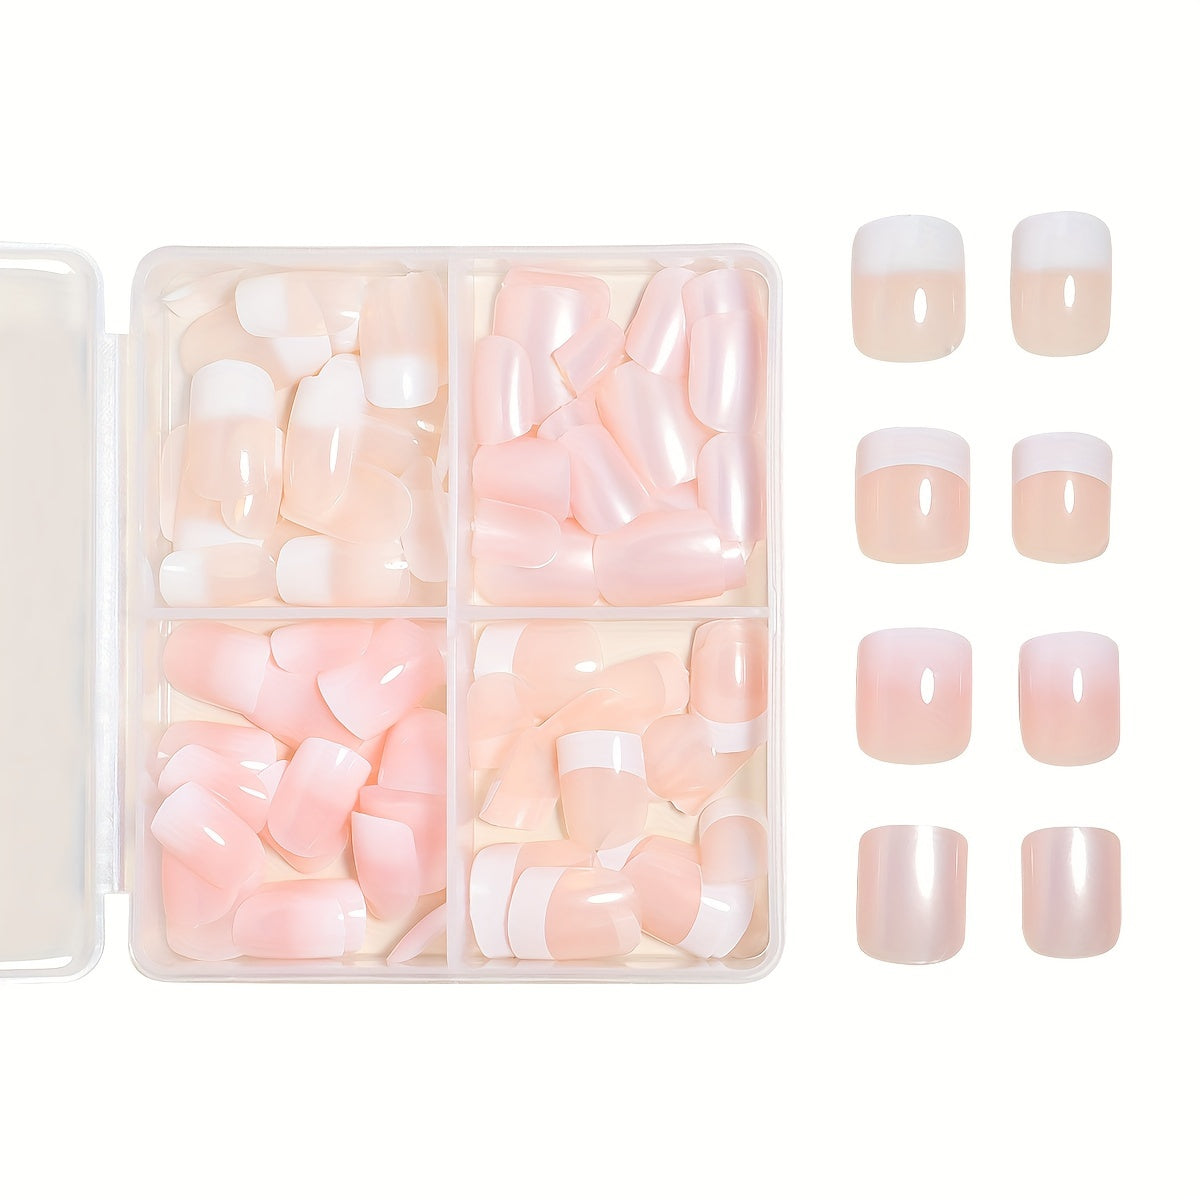 96 Pieces Short Square Press-on Nails - 4 Colors, Full Coverage, White French Glitter Design